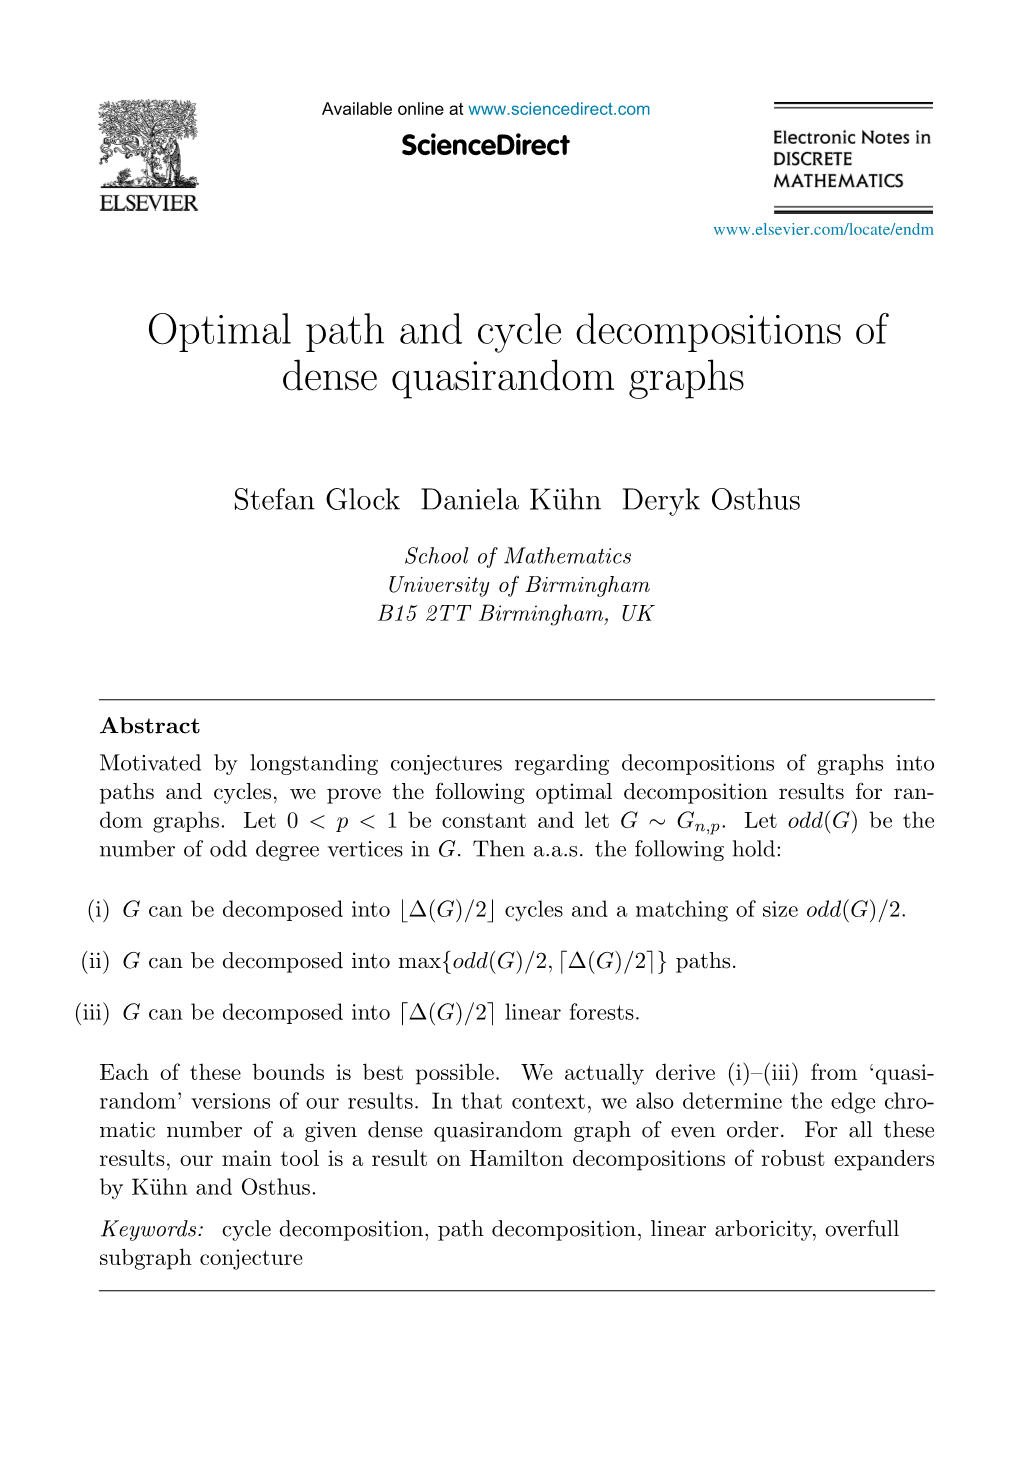 Optimal Path and Cycle Decompositions of Dense Quasirandom Graphs